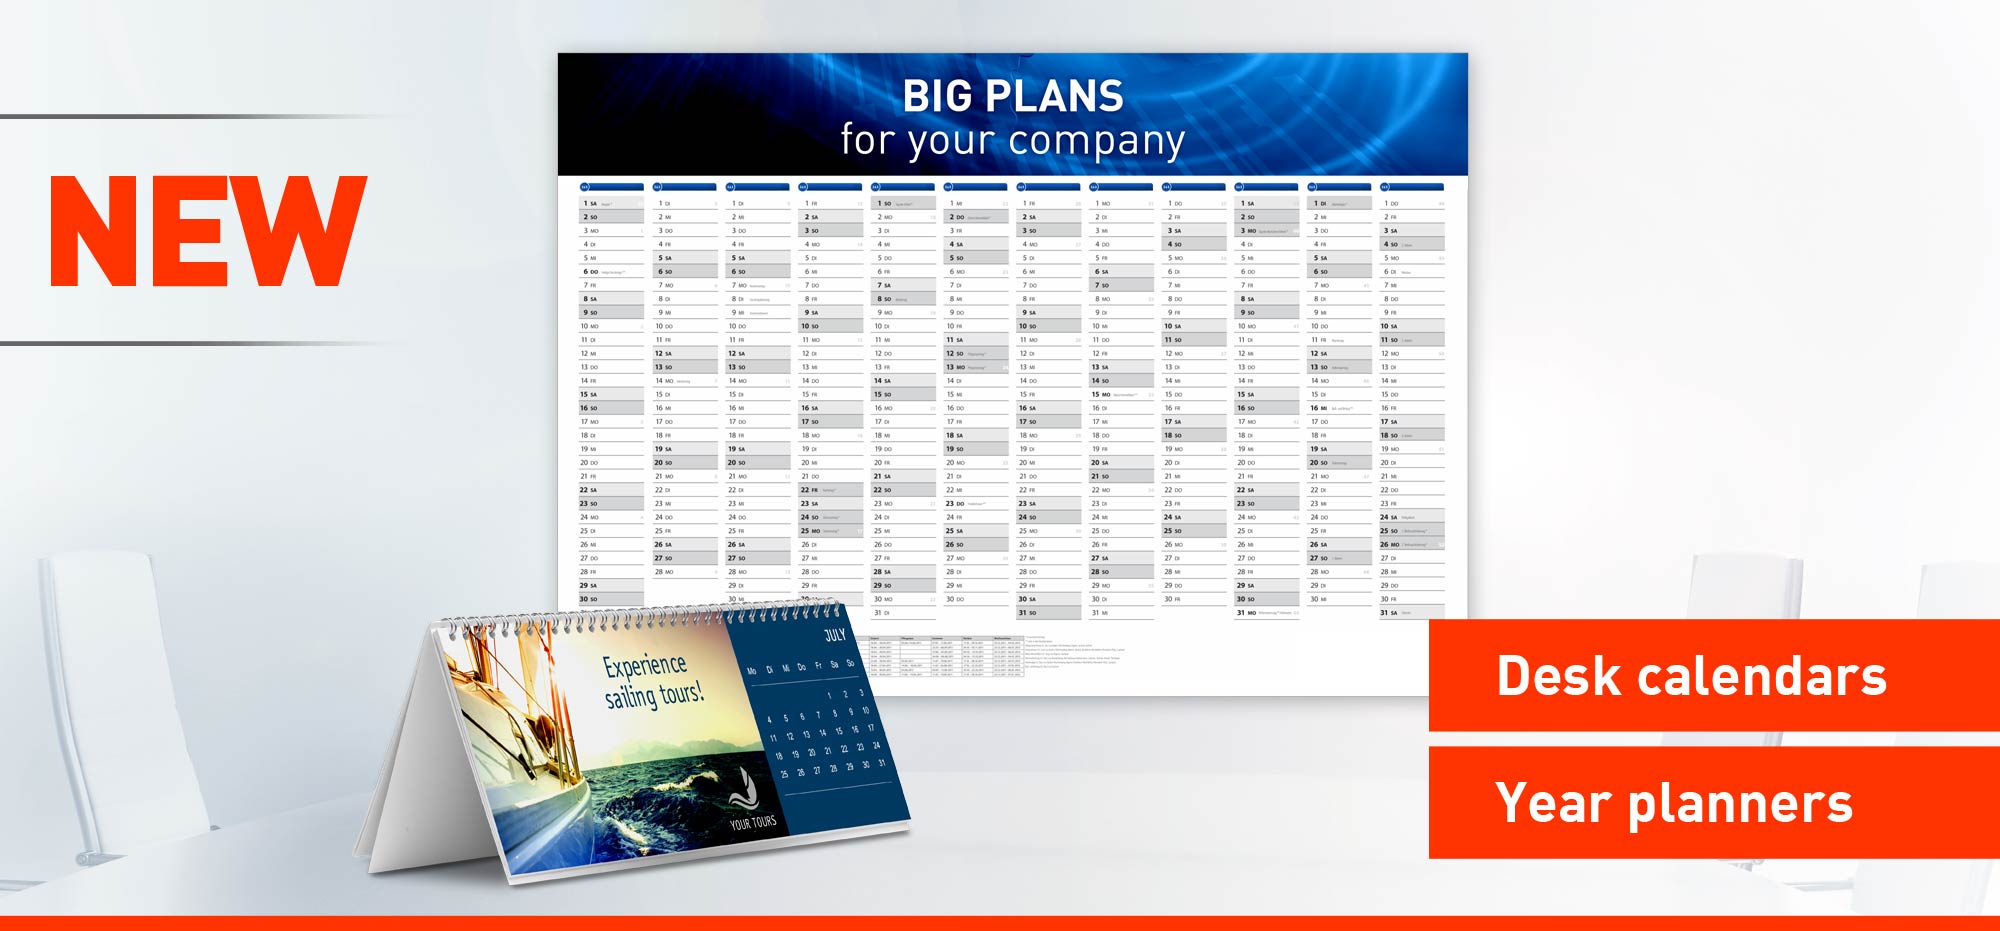 Desk calendars and Year planners